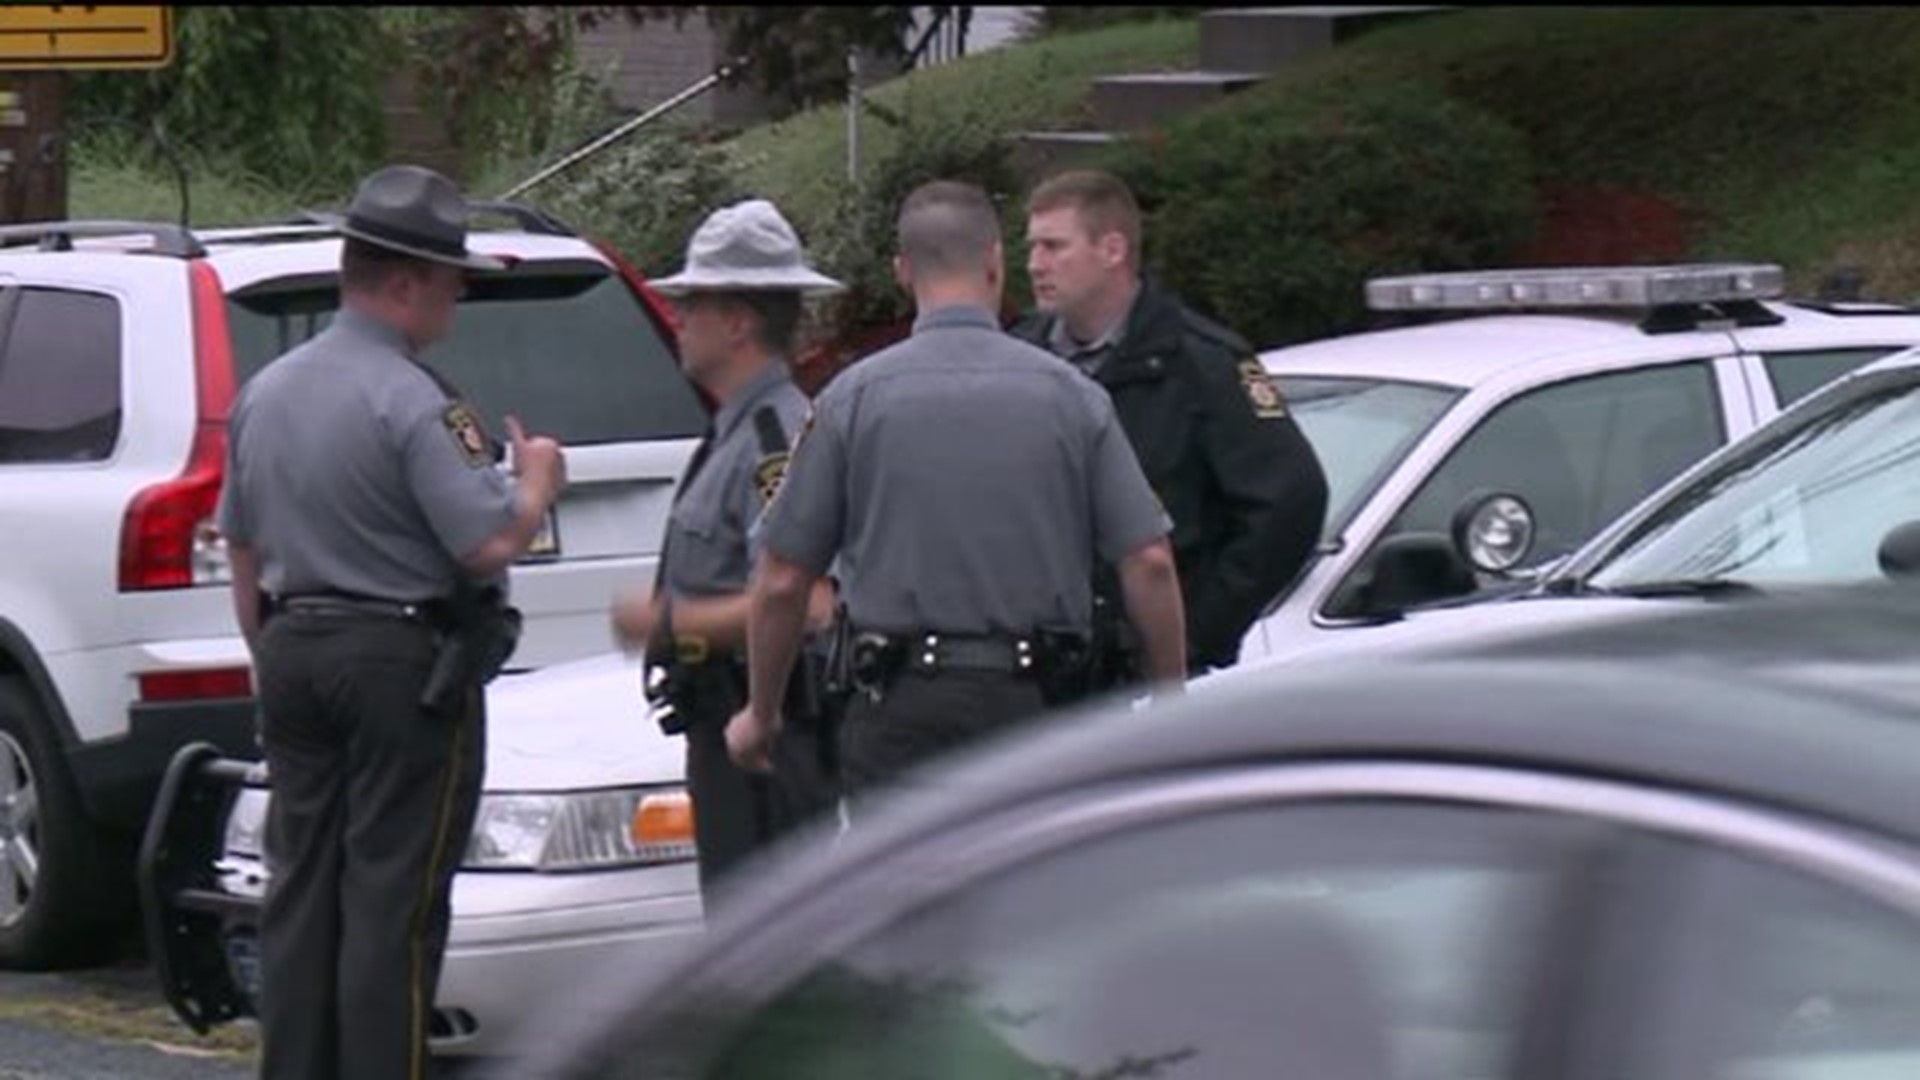 Search for Suspect in Shooting at State Police Barracks